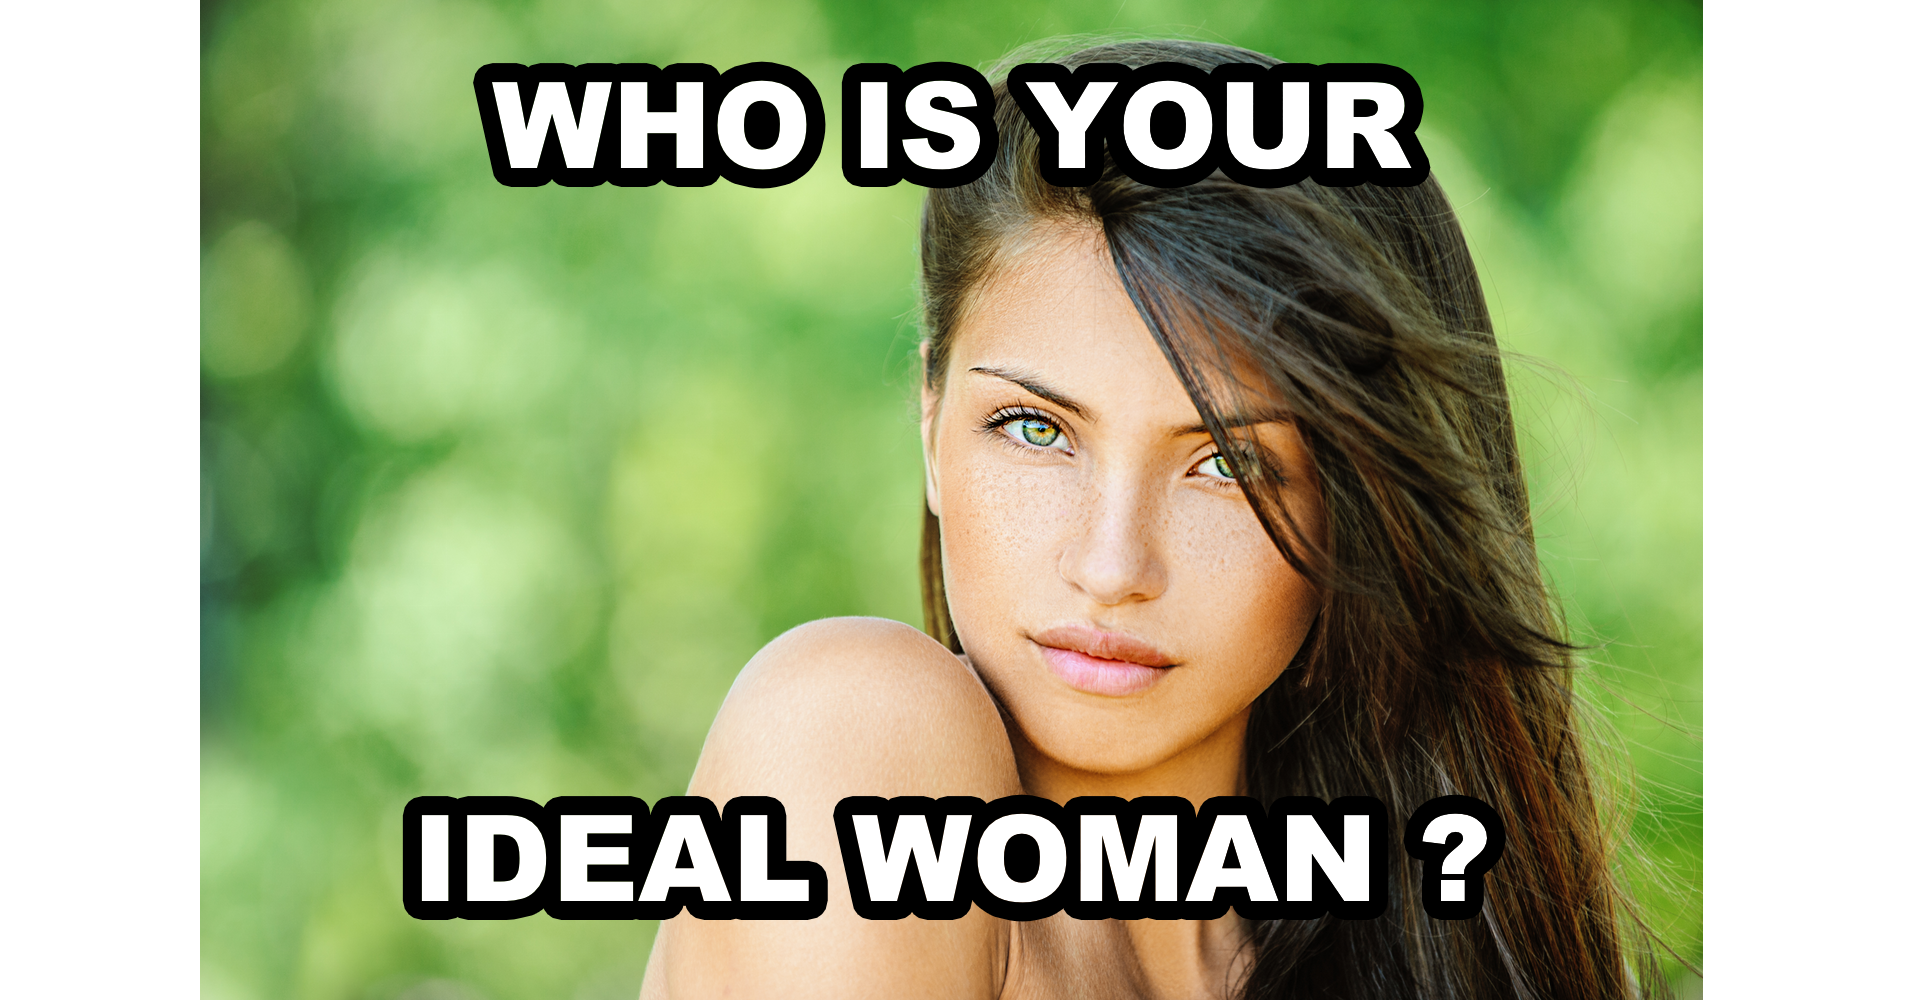 Of woman quiz type Personality Test